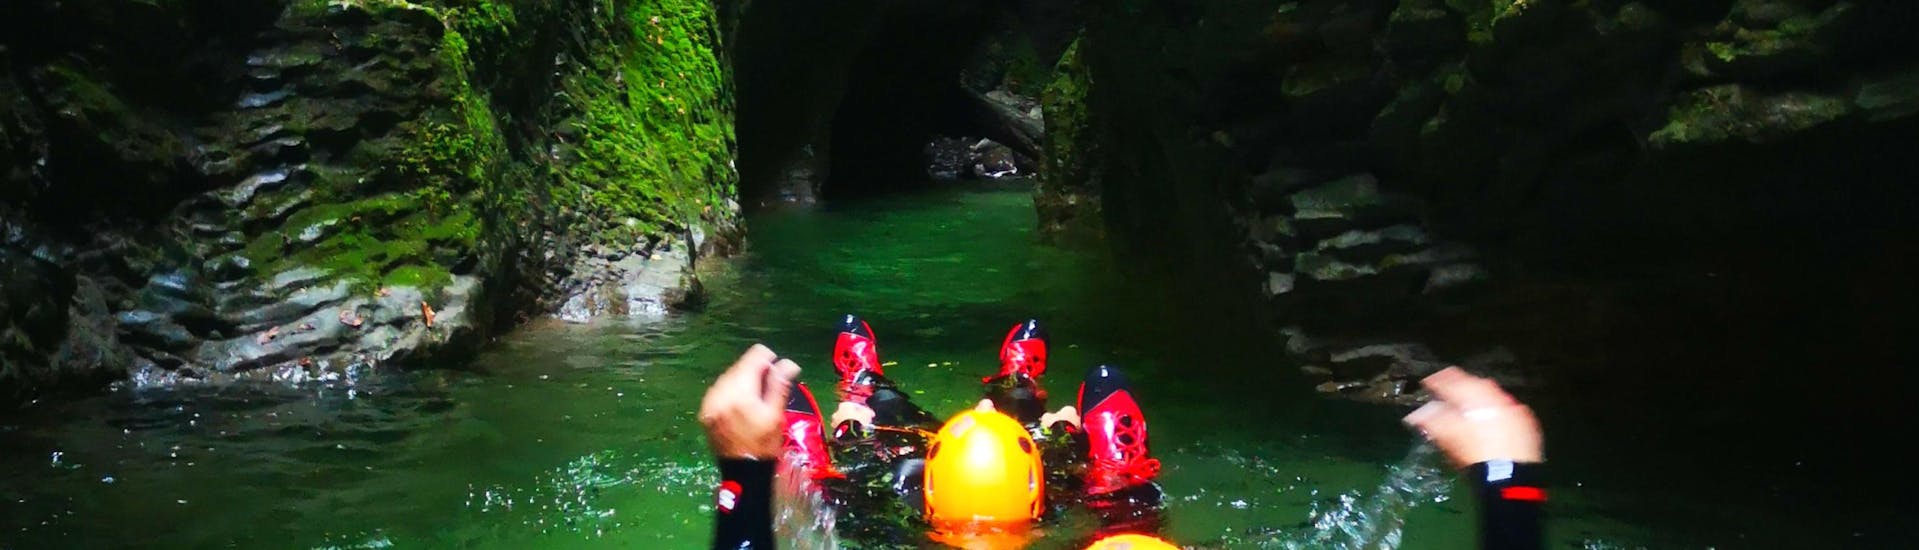 canyoning-for-thrill-seekers-kozjak-natures-ways-bovec-hero